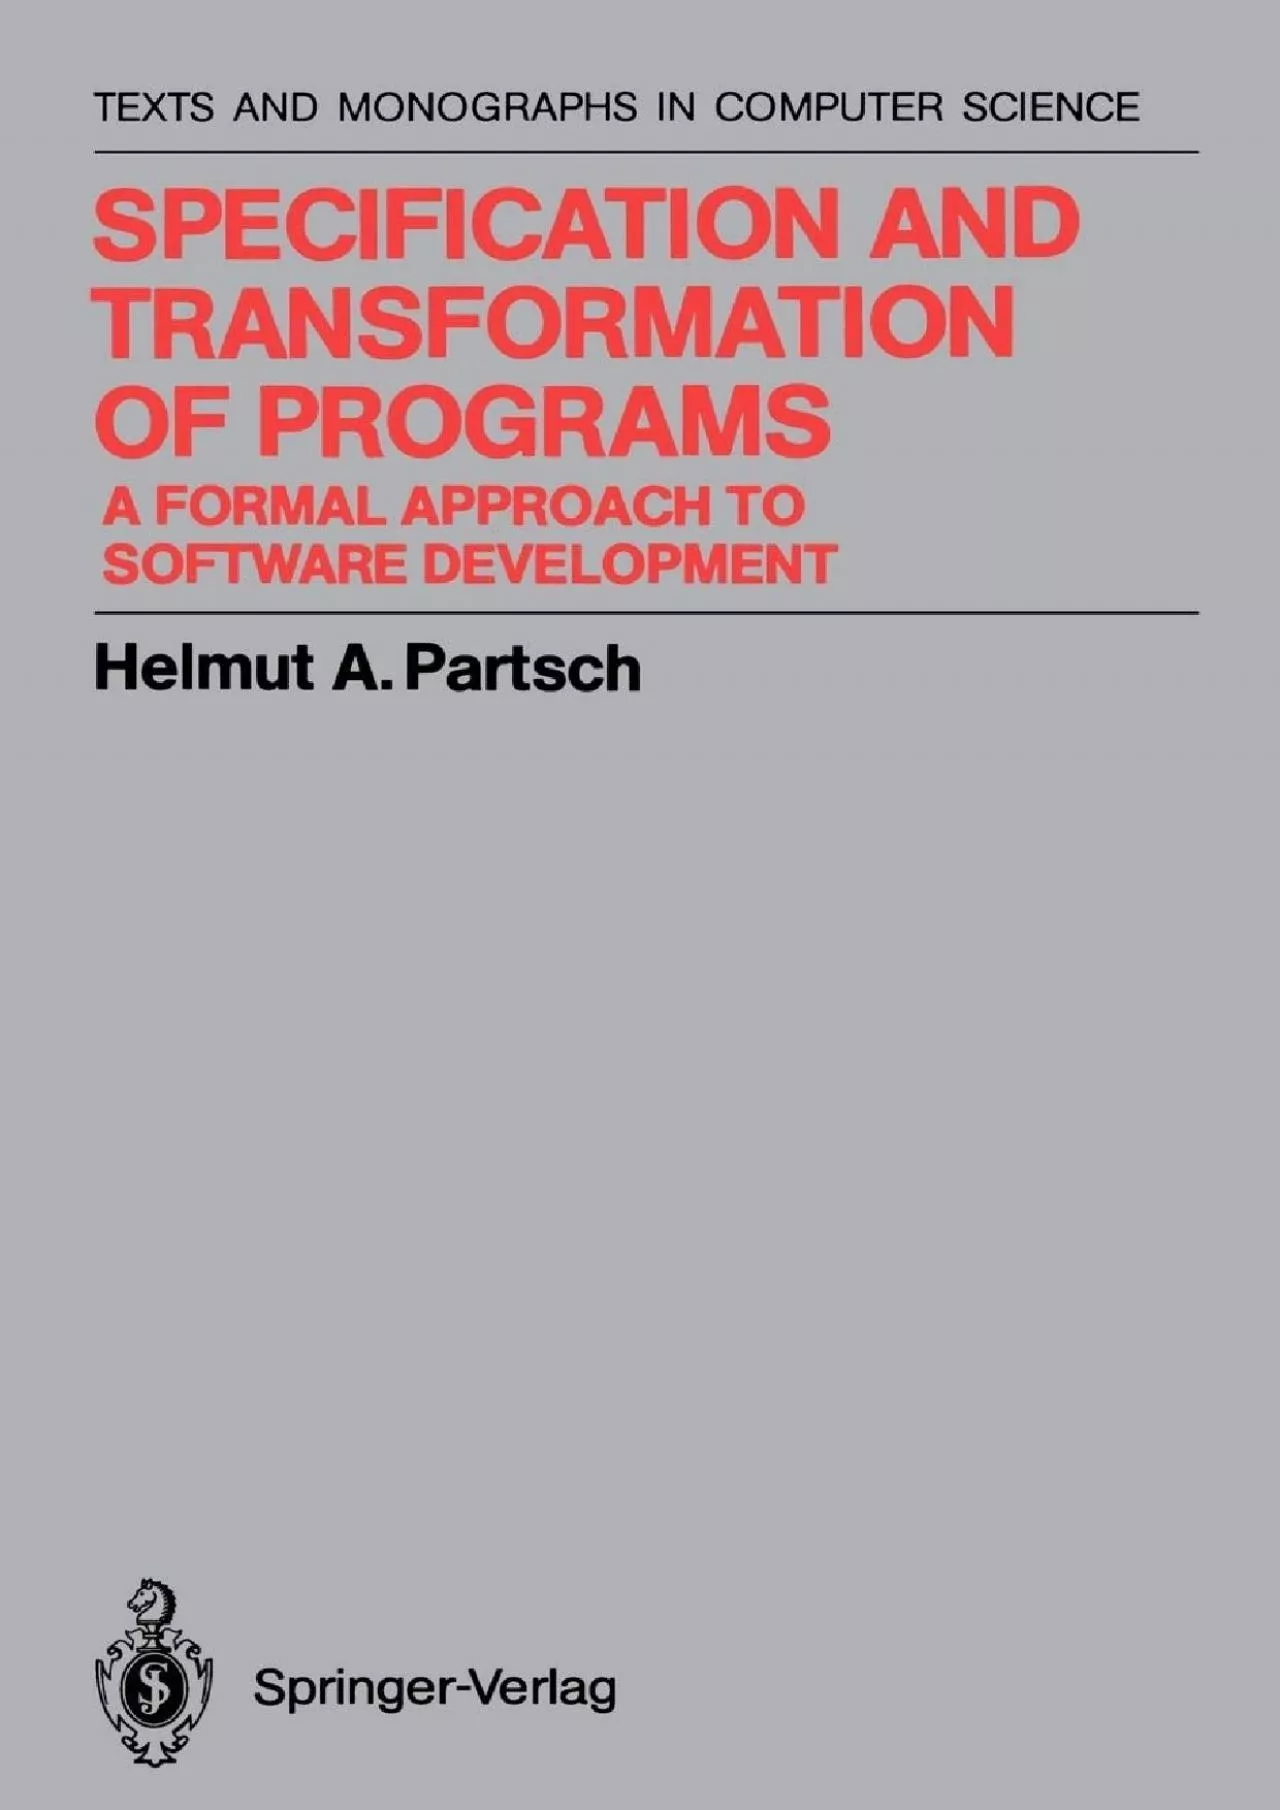 [BEST]-Specification and Transformation of Programs: A Formal Approach to Software Development